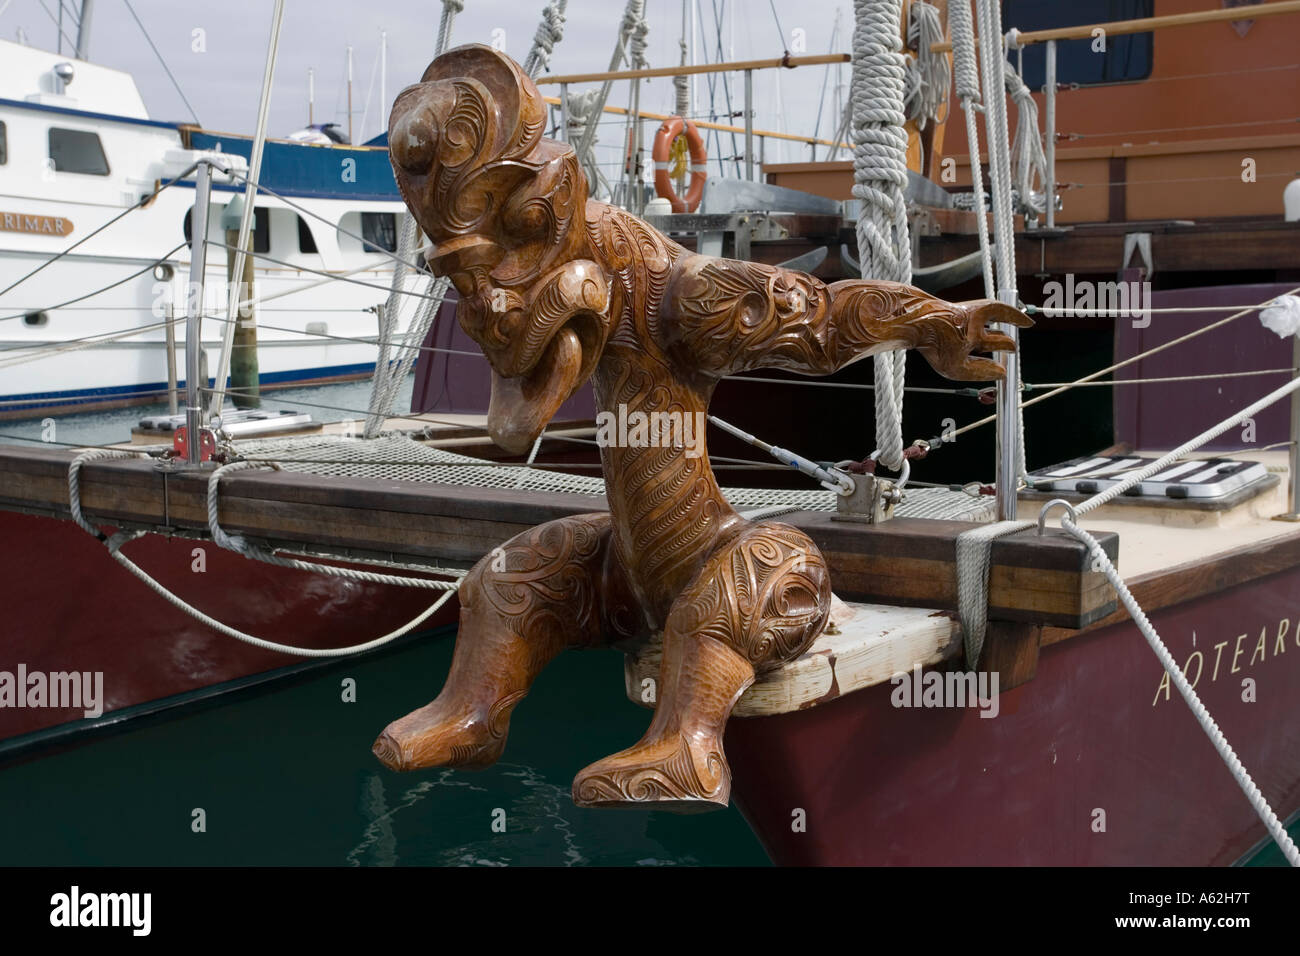 Maori traditional wood carving on prow of sailing boat near Auckland New Zealand Stock Photo